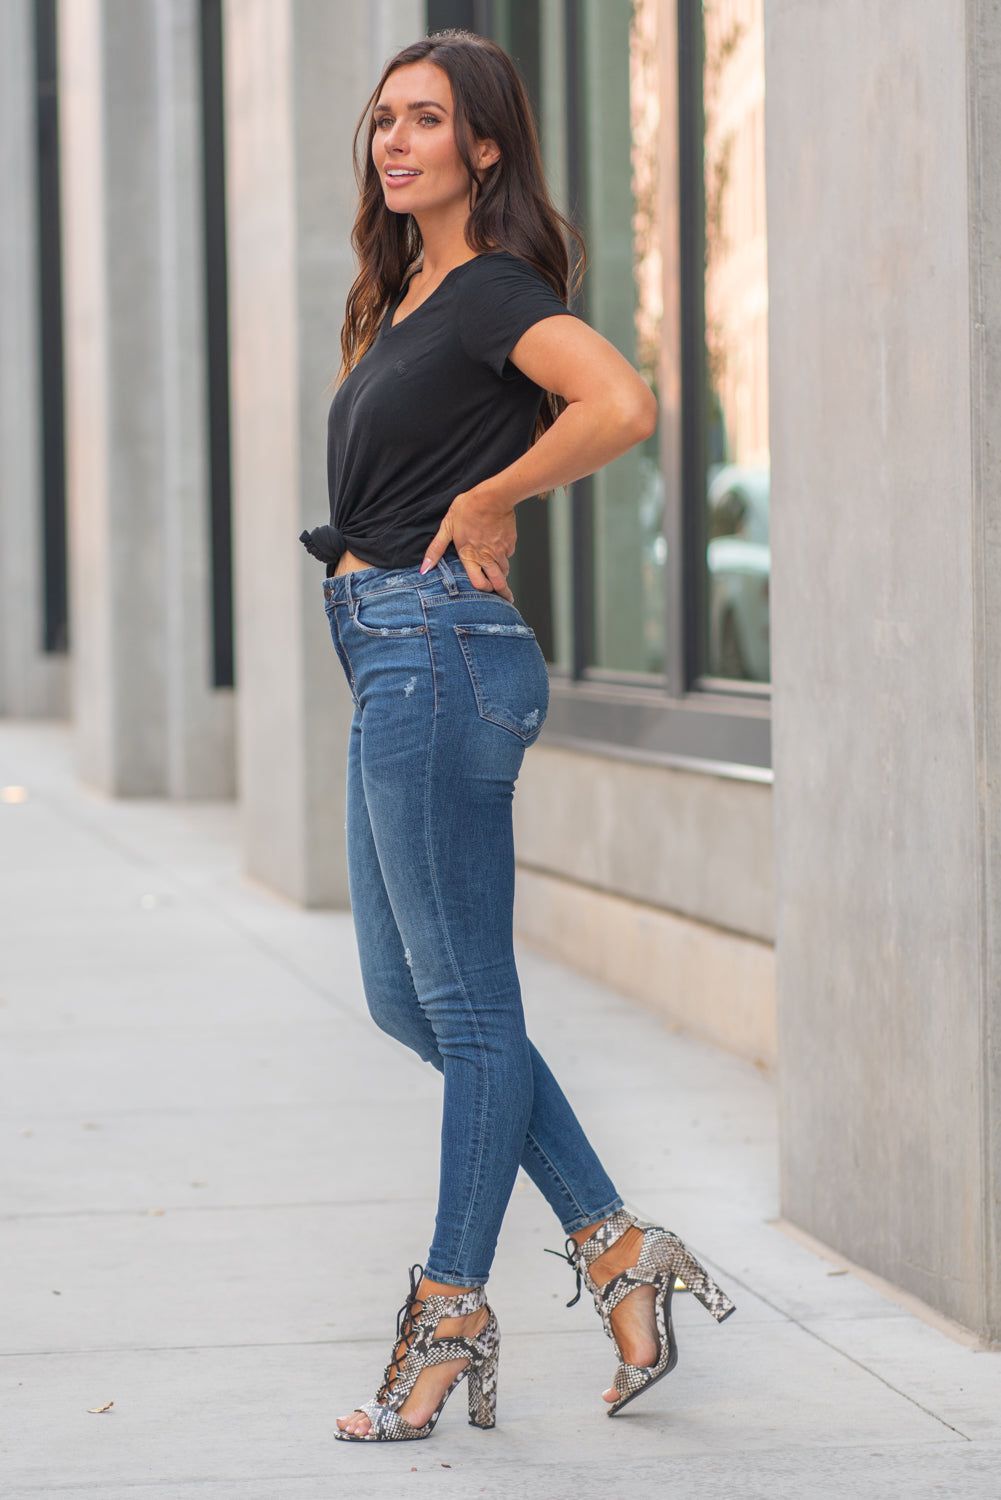 How to Wear Mom Jeans (3 Easy Tips) - Cute Mom Jeans Outfits to Copy